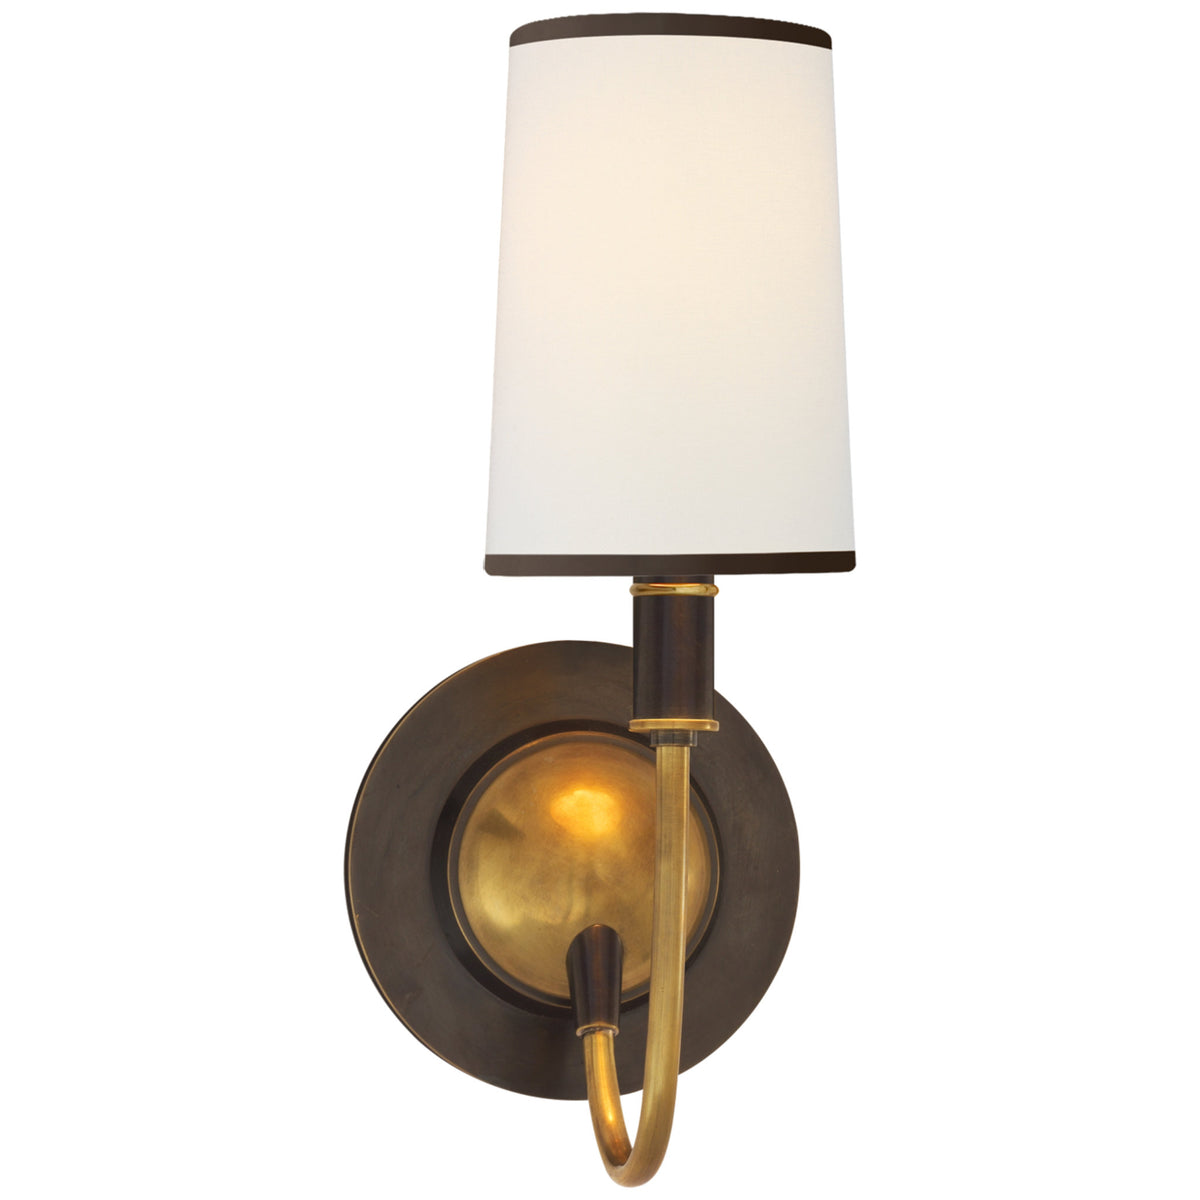 TOB2290BZHABL by Visual Comfort - Osiris Single Reflector Sconce in Bronze  and Hand-Rubbed Antique Brass with Linen Diffuser